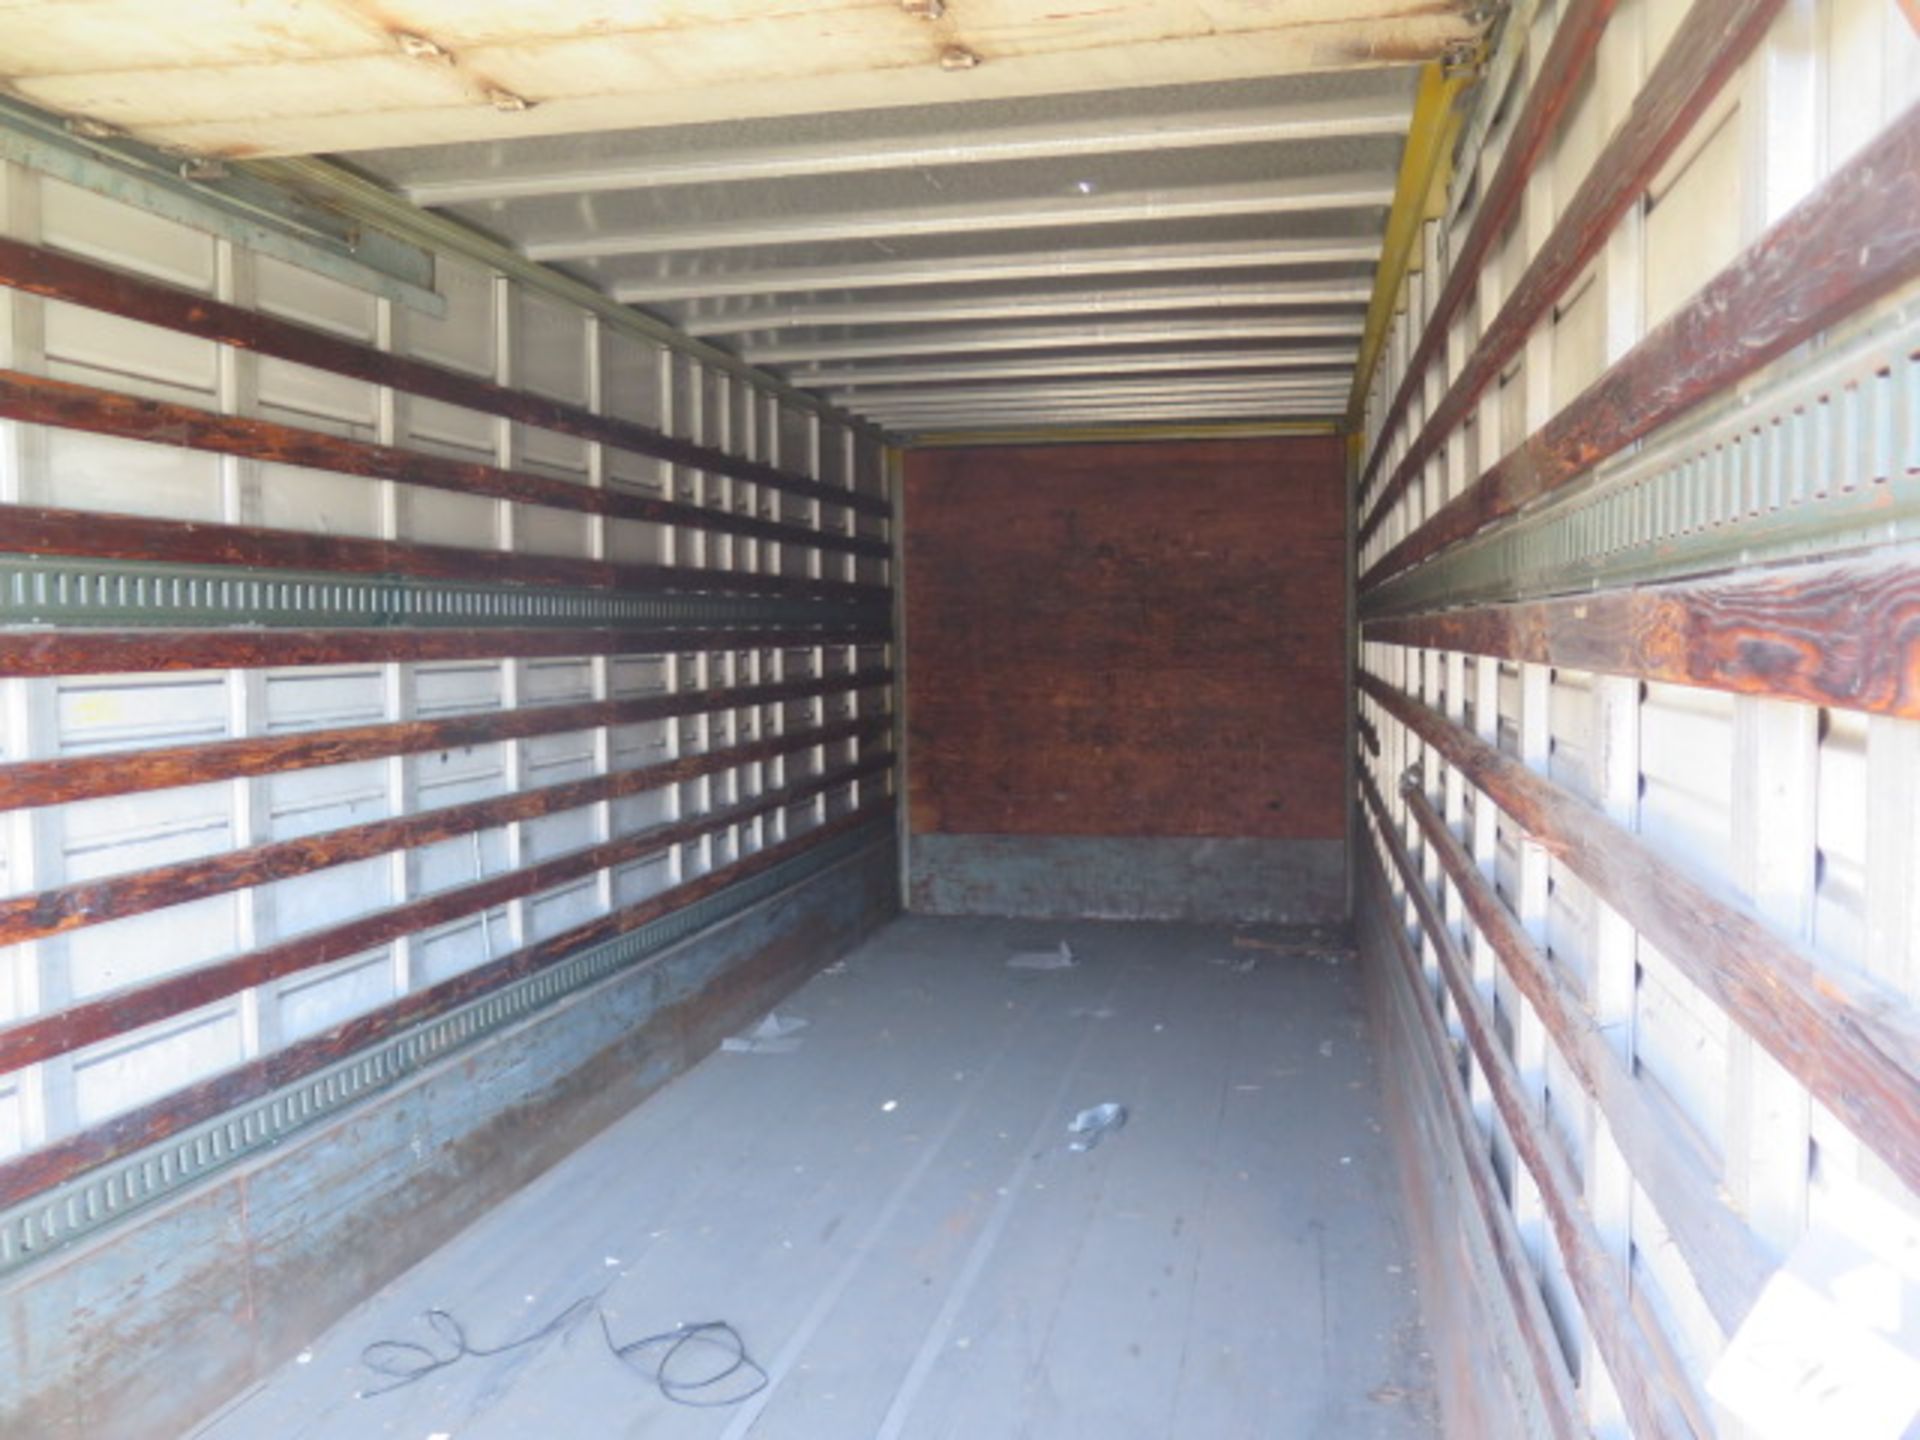 20' Trailer (SOLD AS STORAGE CONTAINER) (SOLD AS-IS - NO WARRANTY) - Image 4 of 5